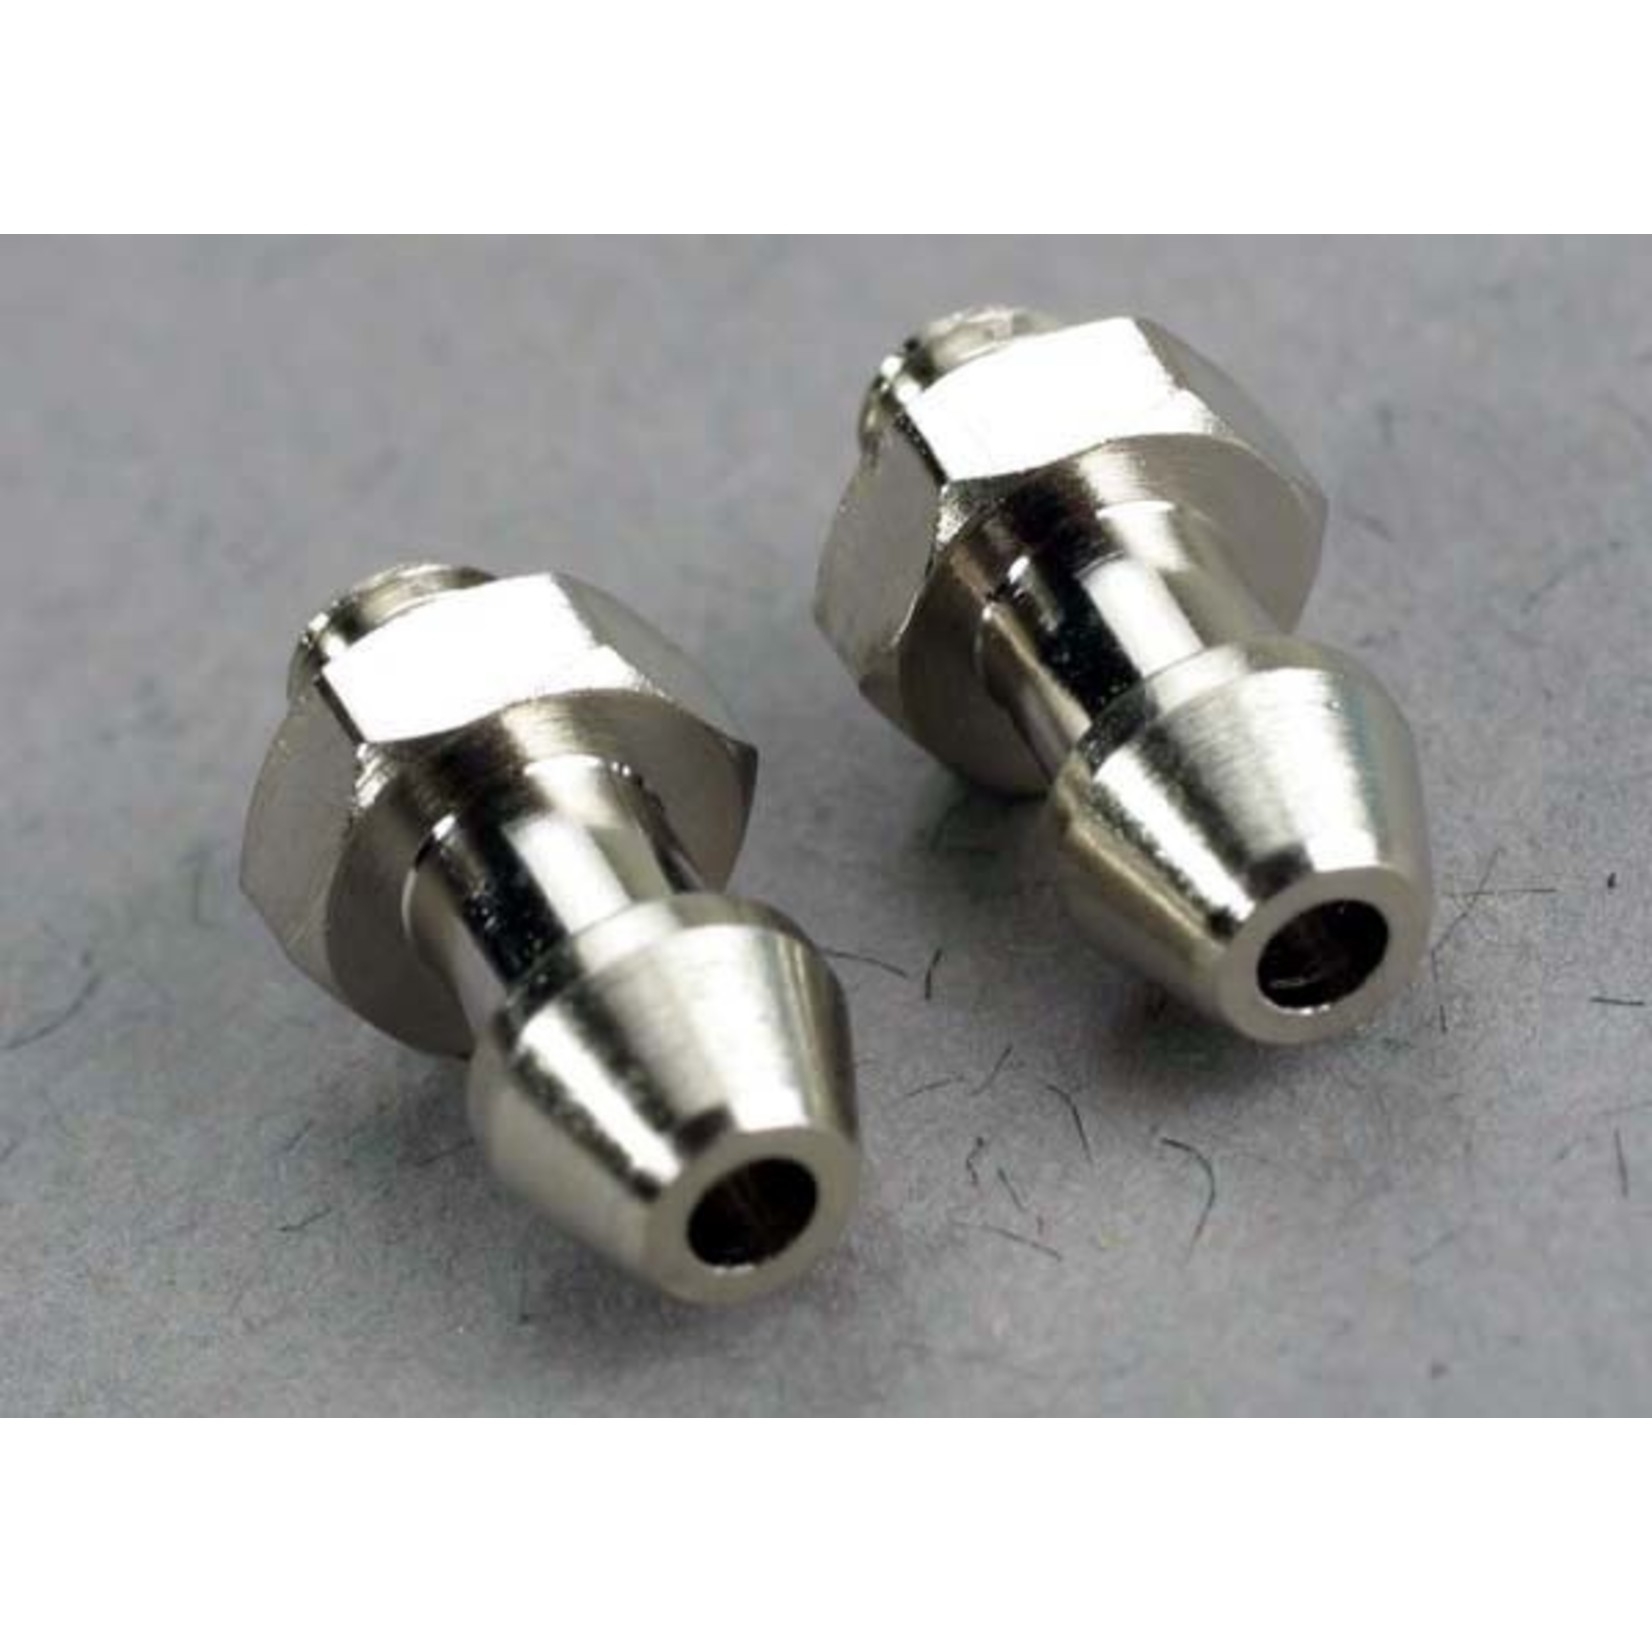 Traxxas 3296 - Inlet Fittings (2)